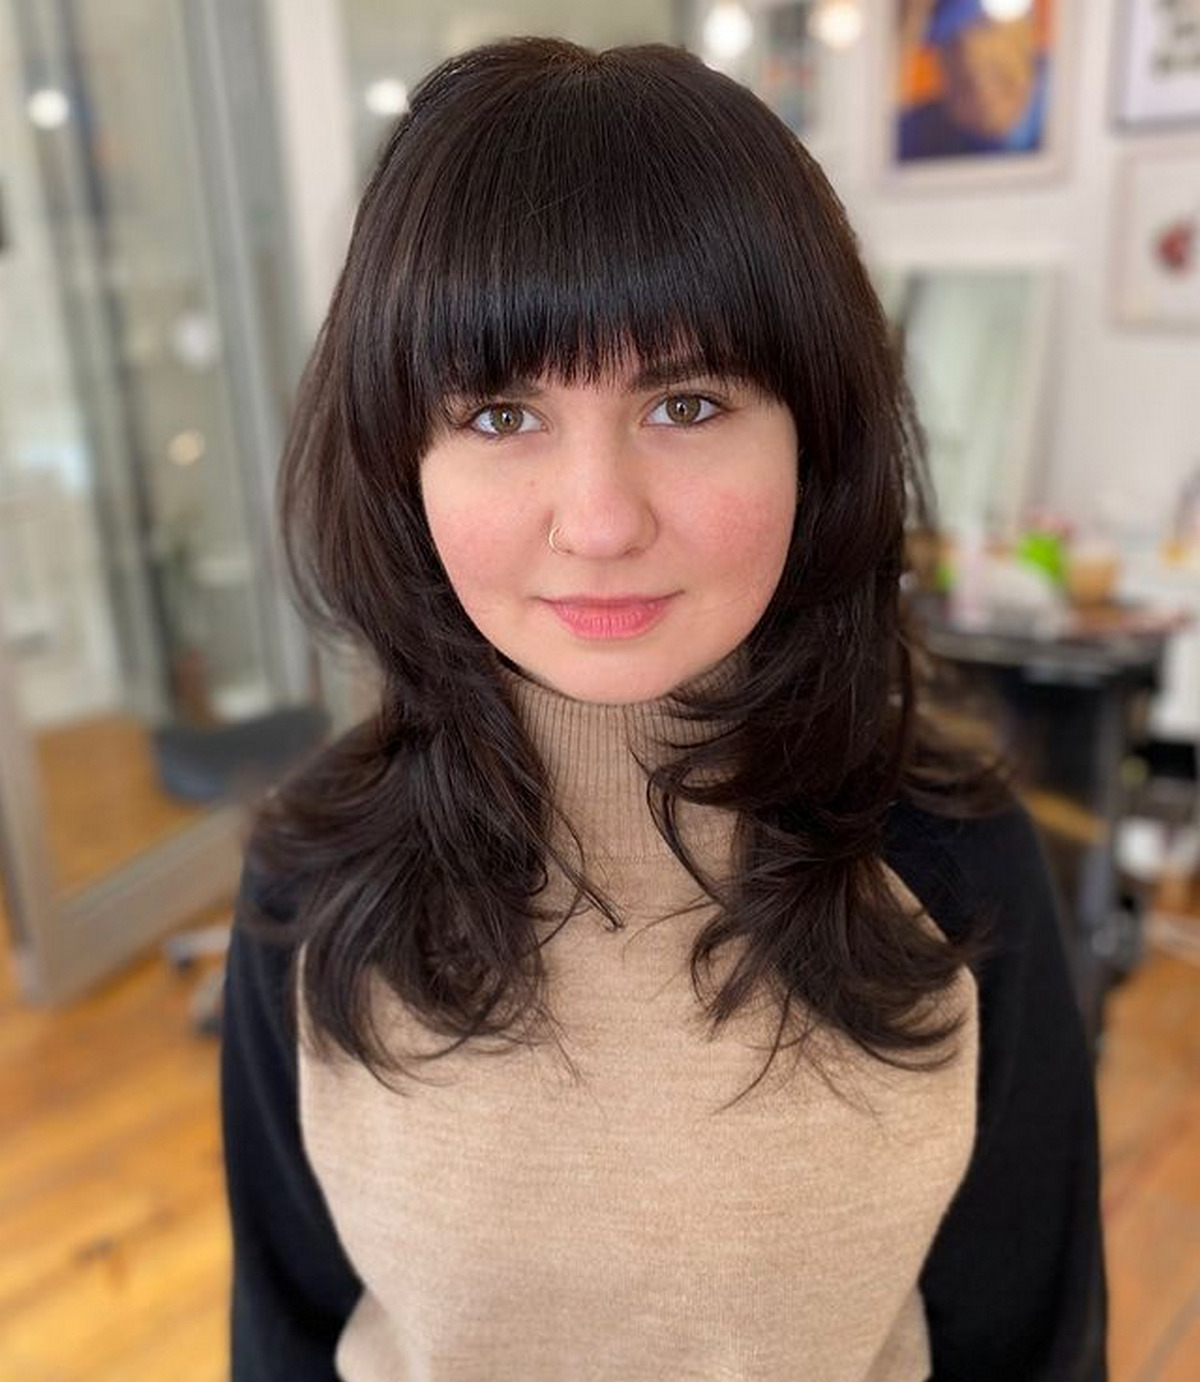 Best Bangs For Round Faces: Heavy Bangs